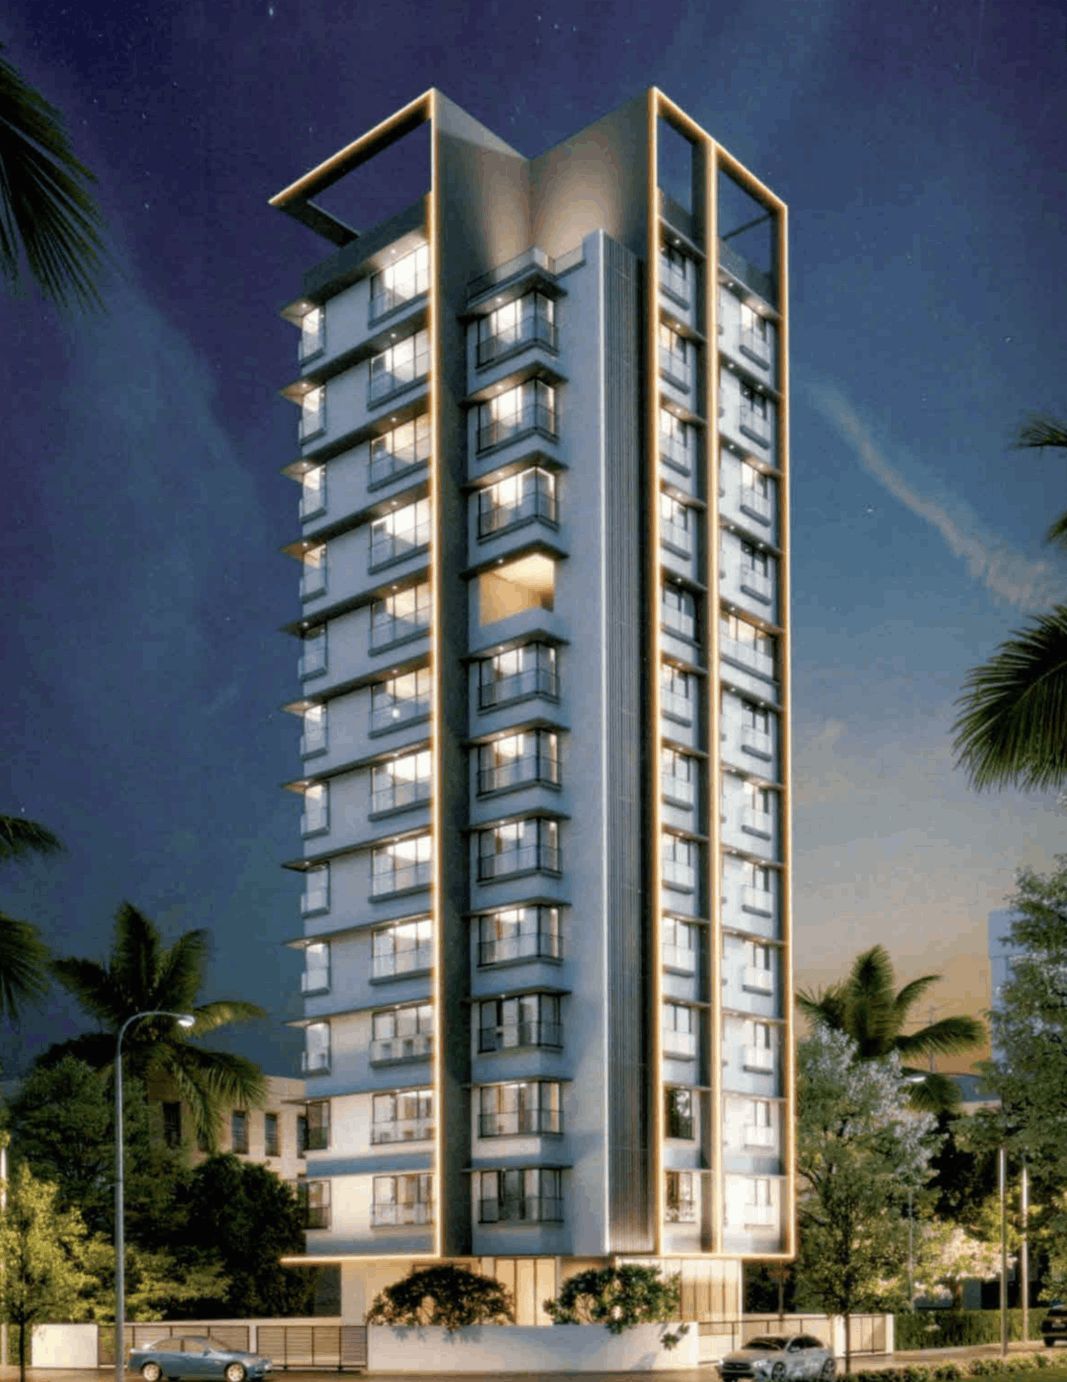 2 Bed/ 2 Bath Sell Apartment/ Flat; 590 sq. ft. carpet area; Under Construction for sale @Bhandup east 